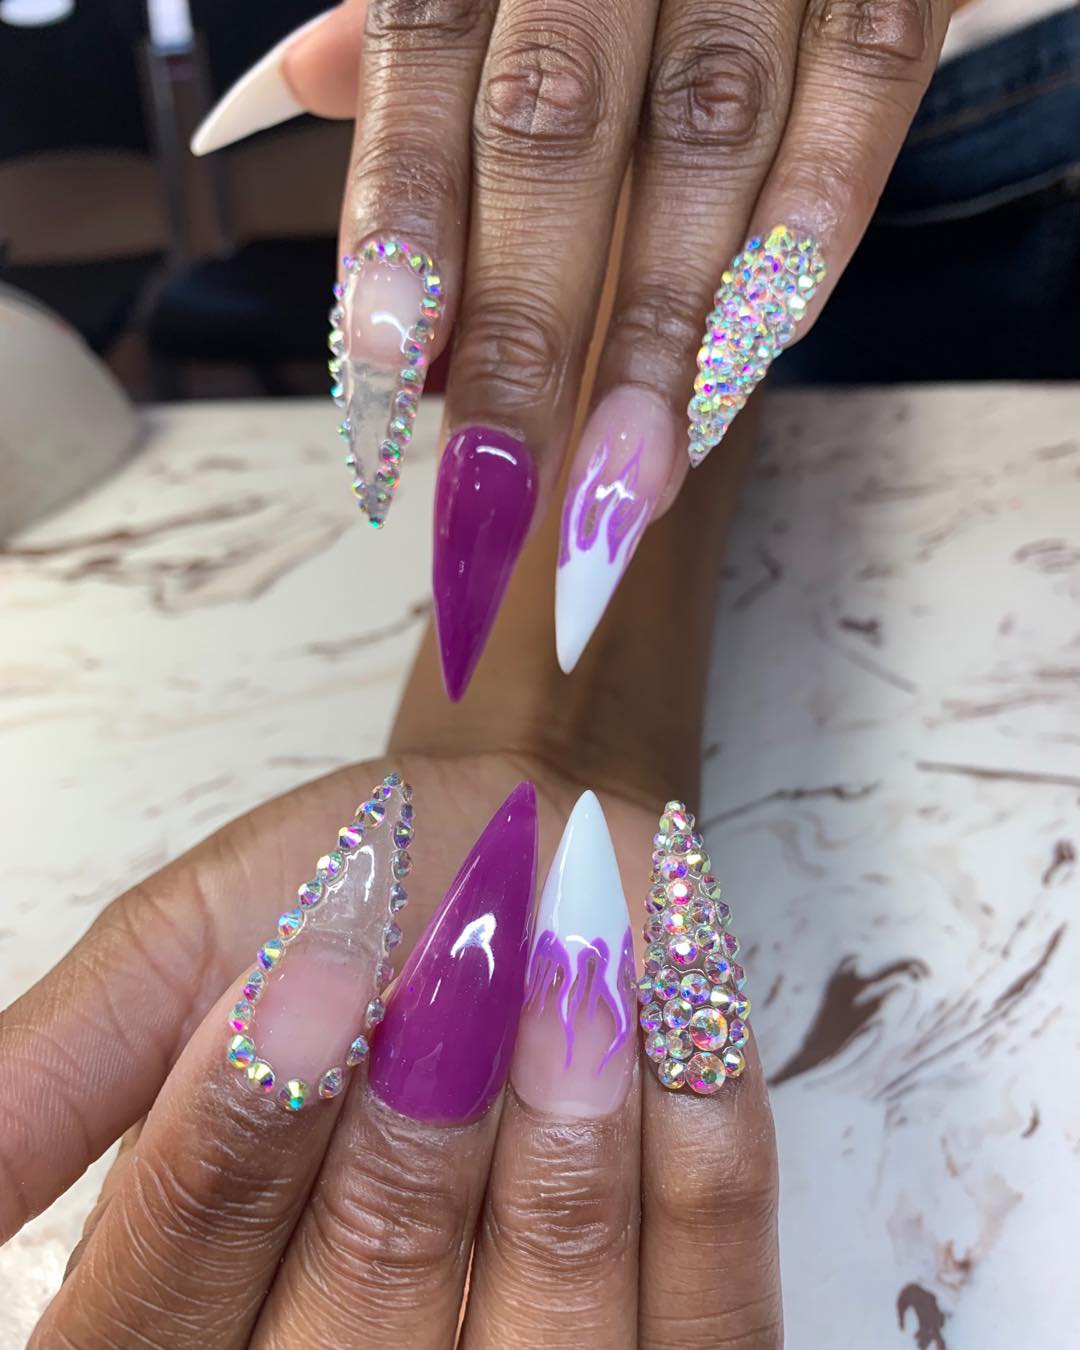 Nails with Diamonds - Best Short Nail Designs